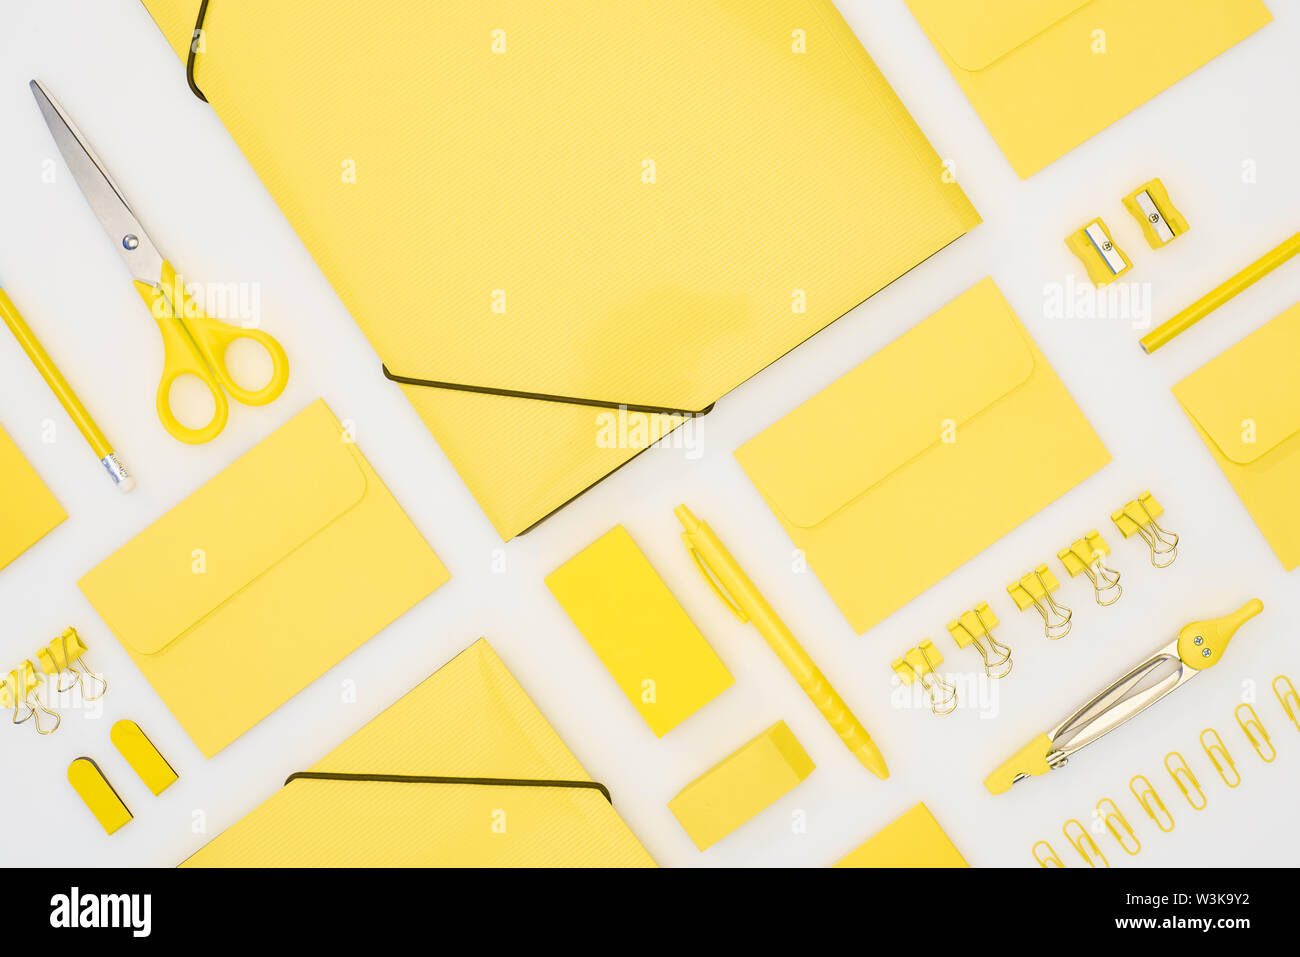 top view of yellow pen, pencils, paper clips, eraser, stickers, envelopes, stickers, folders, scissors, pencil sharpeners and compasses isolated on wh Stock Photo